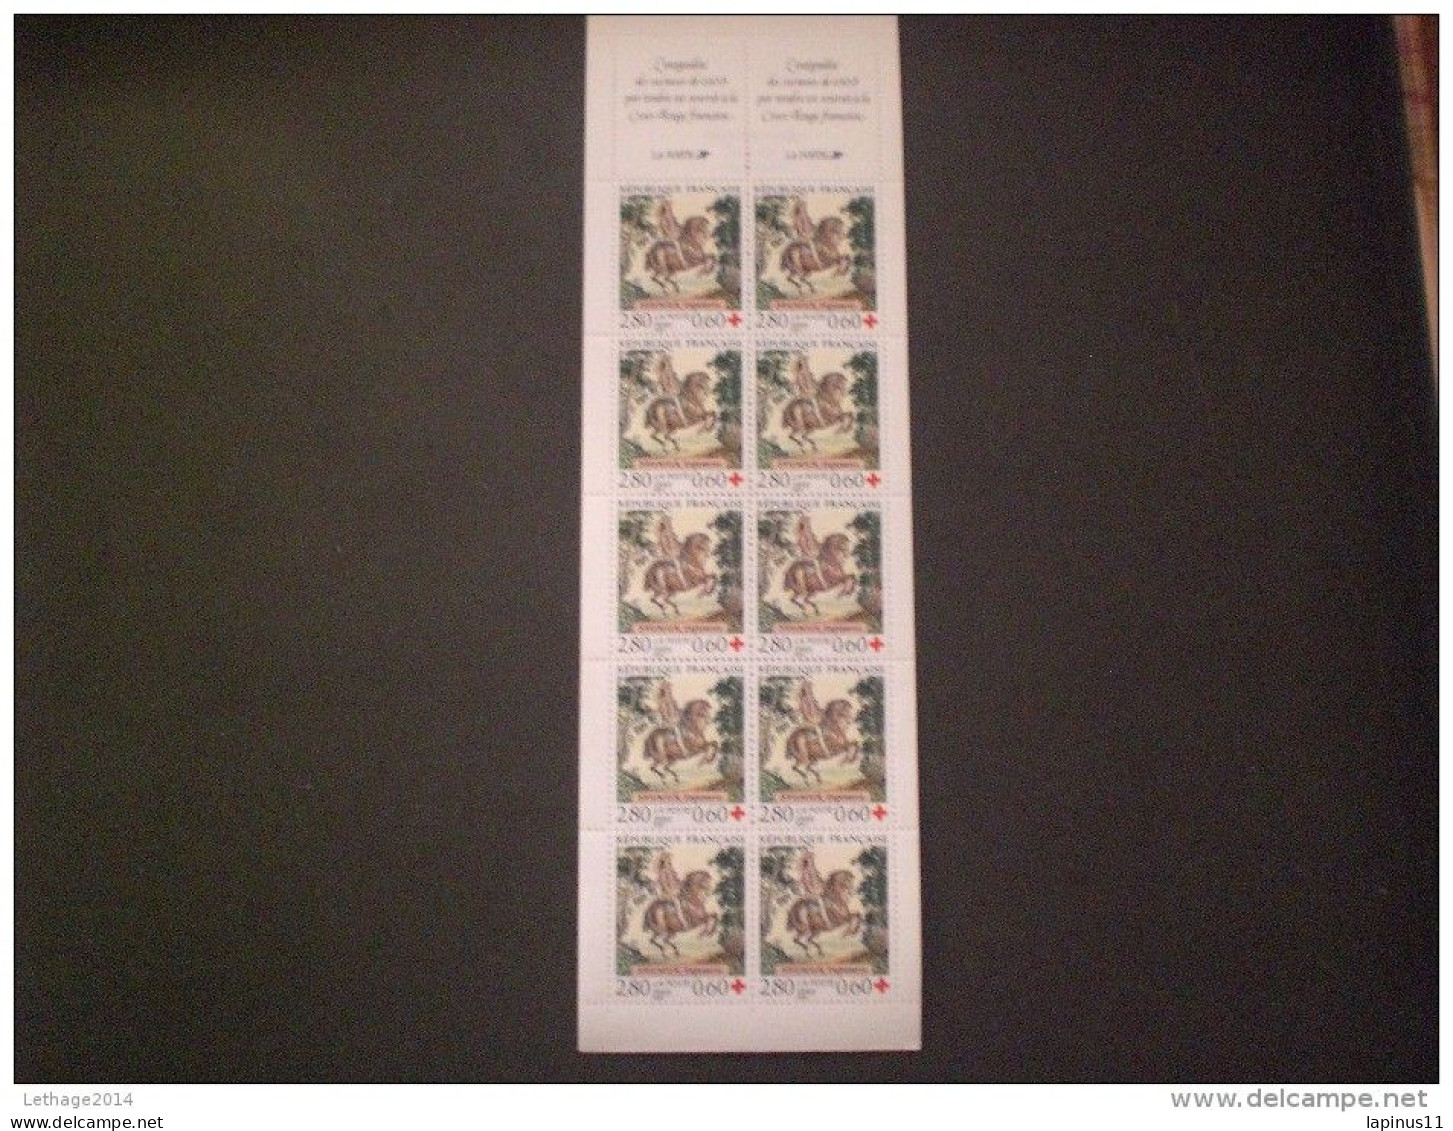 STAMPS FRANCIA CARNETS 1995 RED CROSS - Croix Rouge